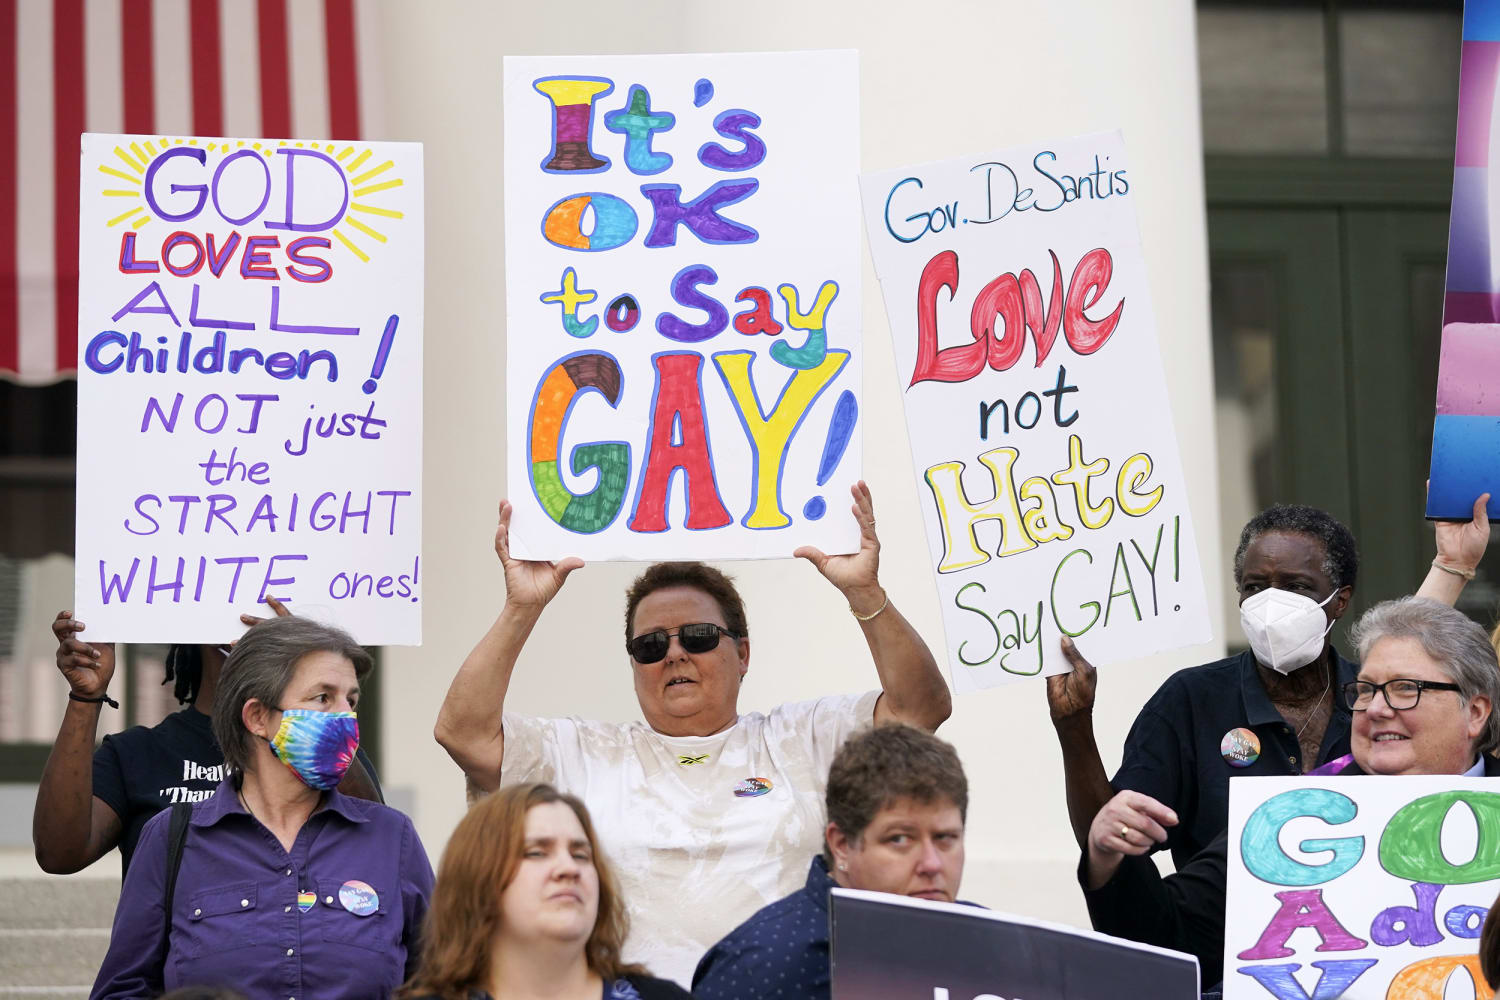 A national 'Don't Say Gay' law? Republicans introduce bill to restrict LGBTQrelated programs